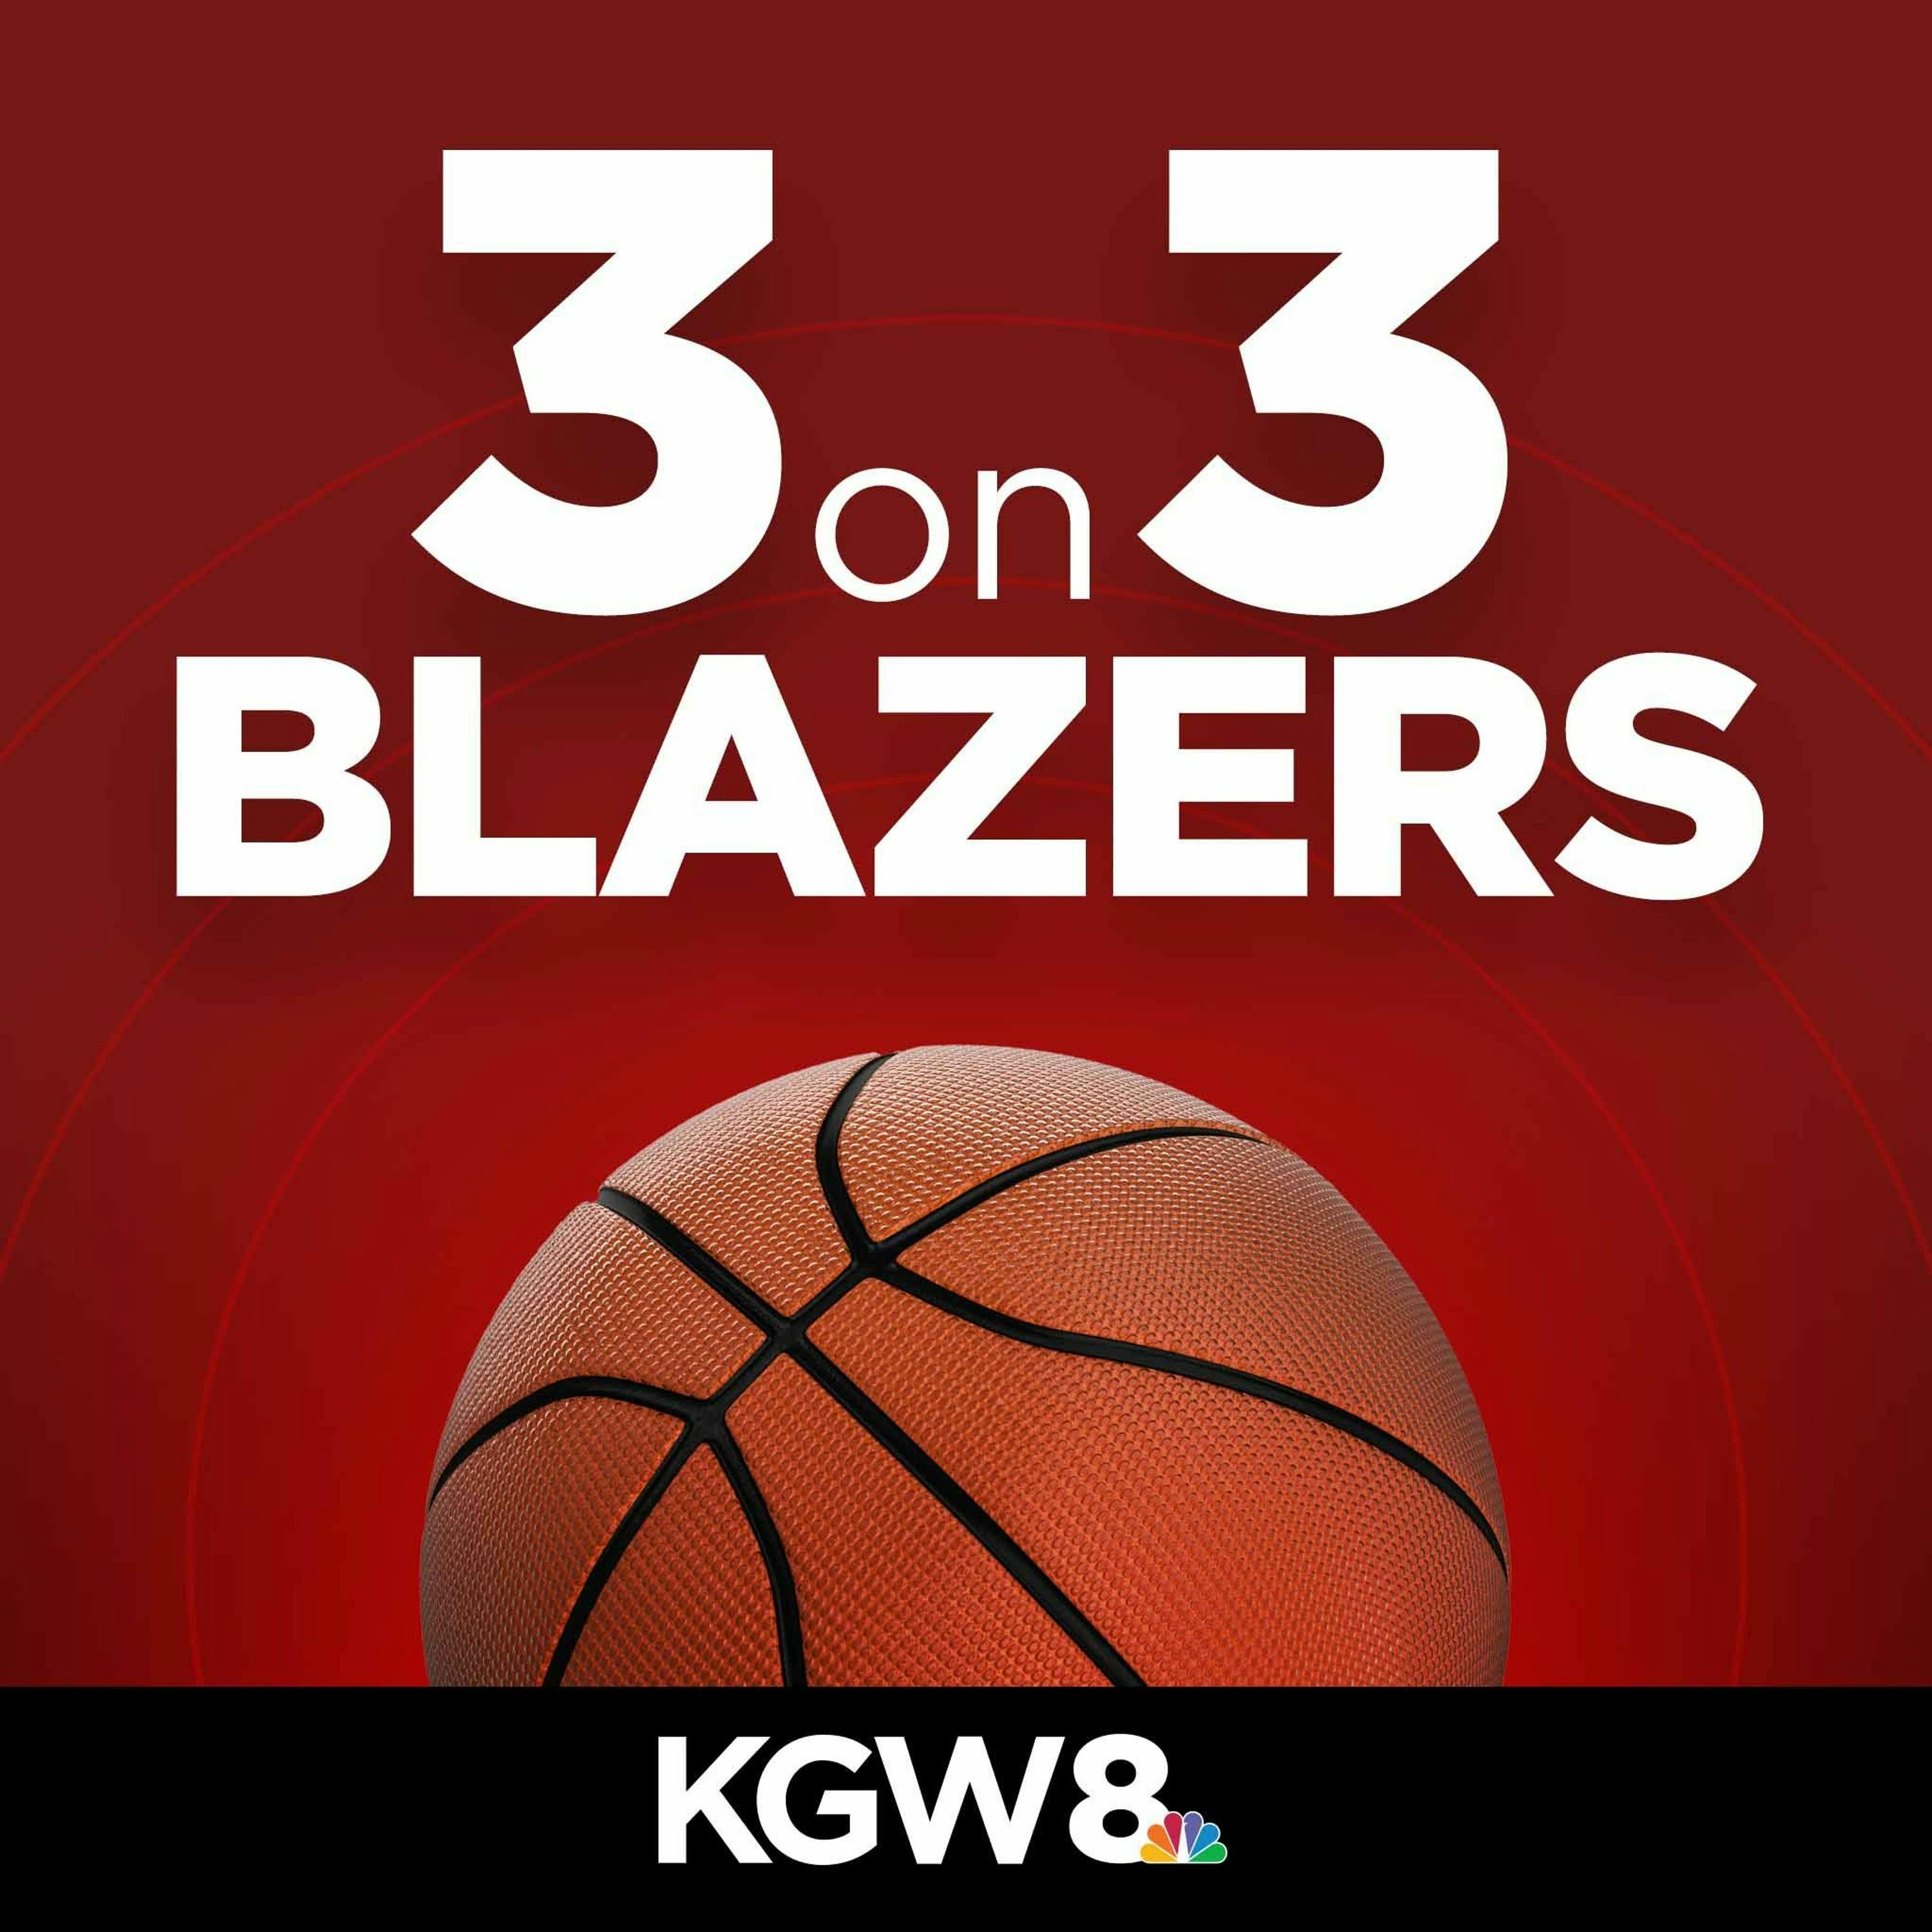 COVID-19 already hits team | Blazers first half schedule | Retiring numbers